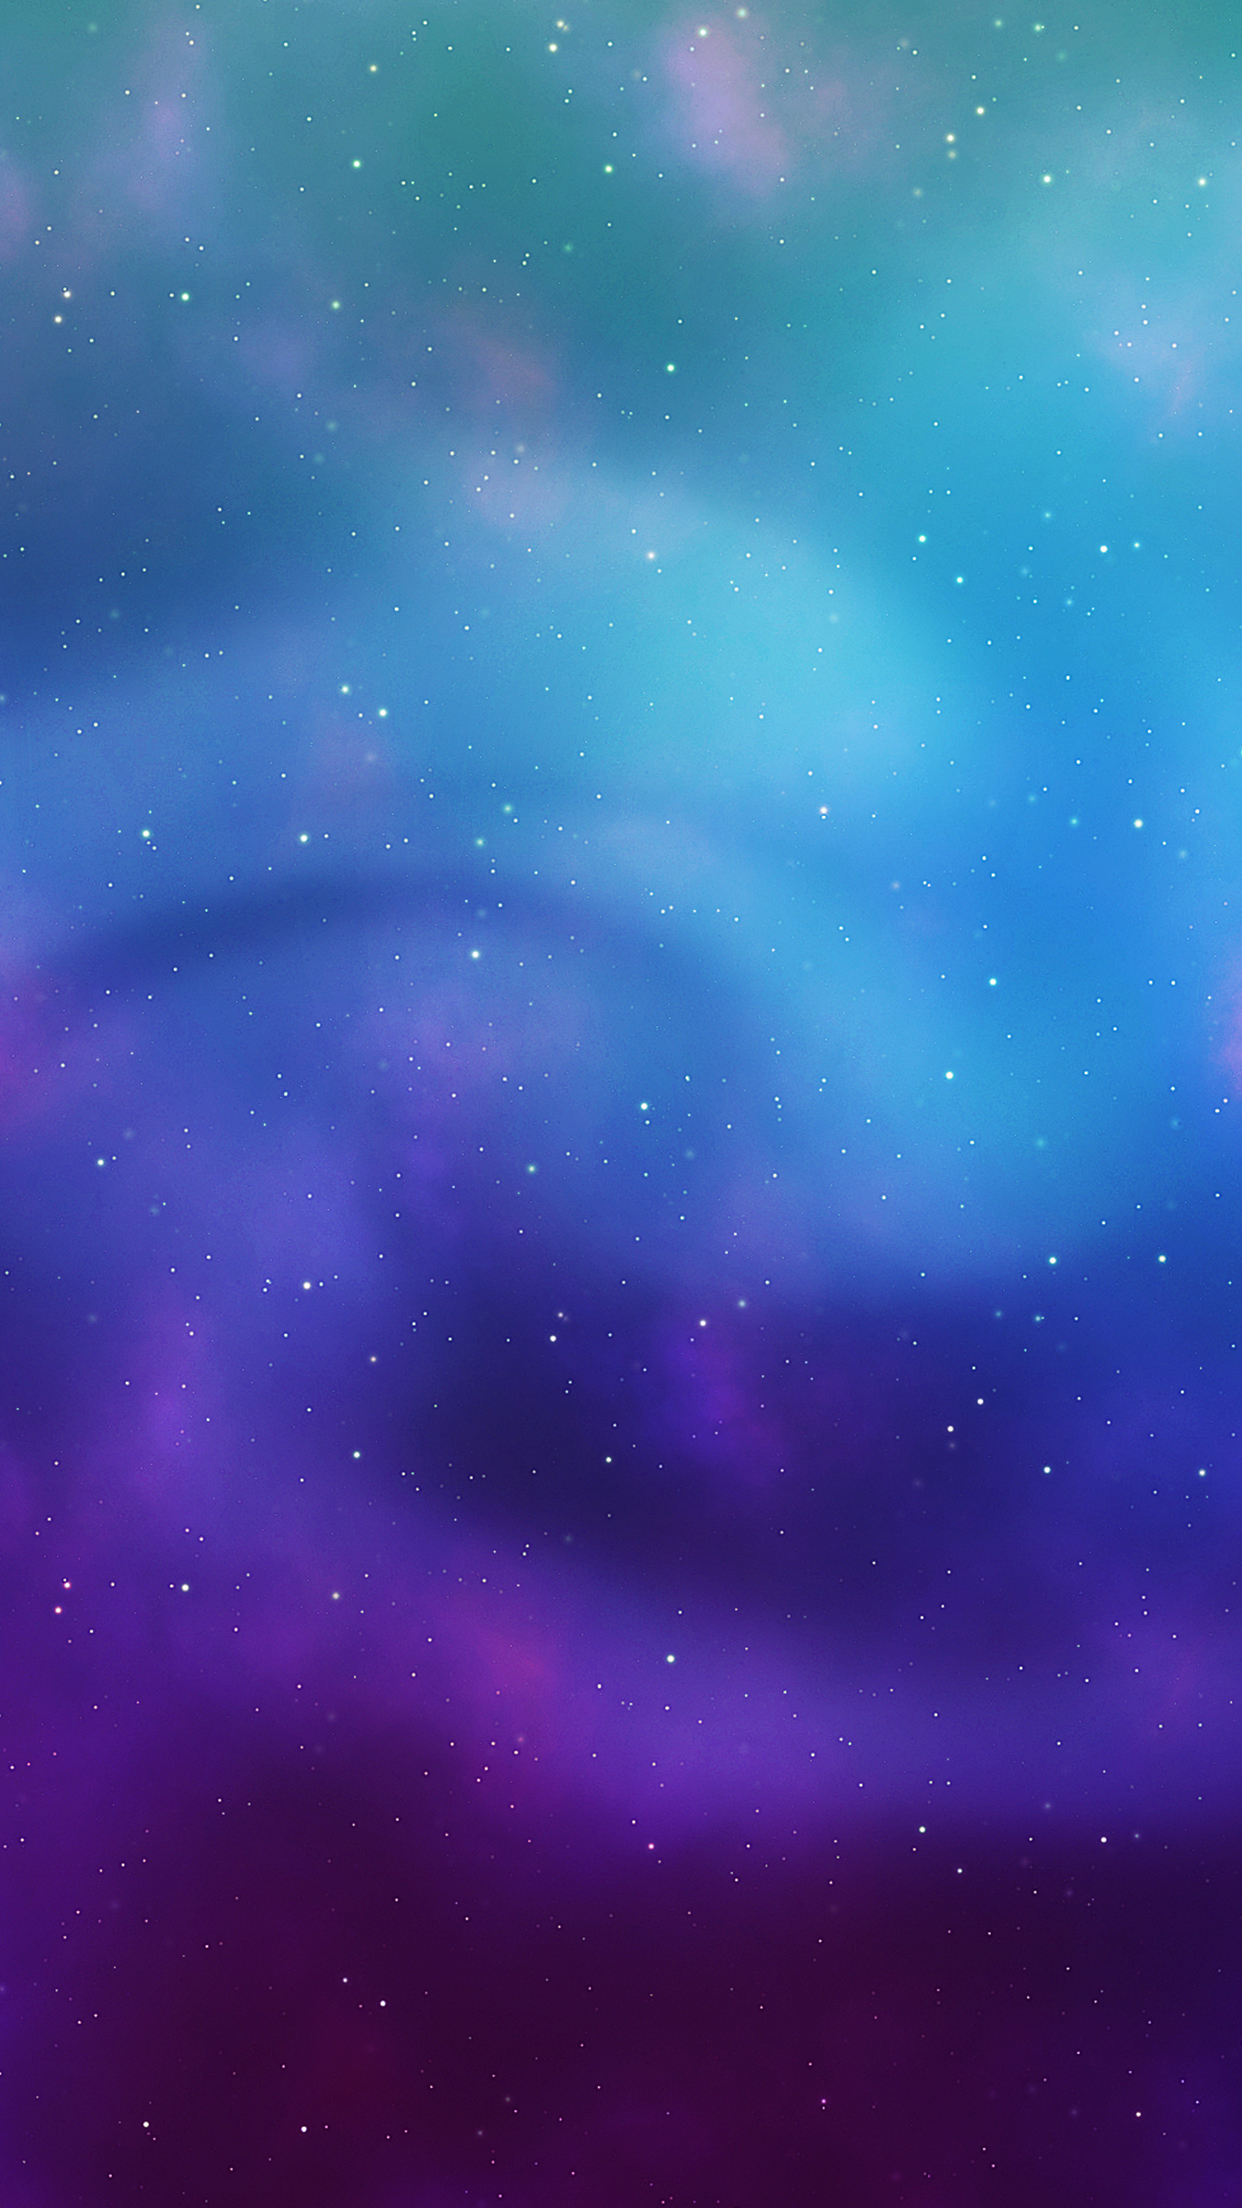 Expansive space wallpapers for iPhone, iPad, and desktop